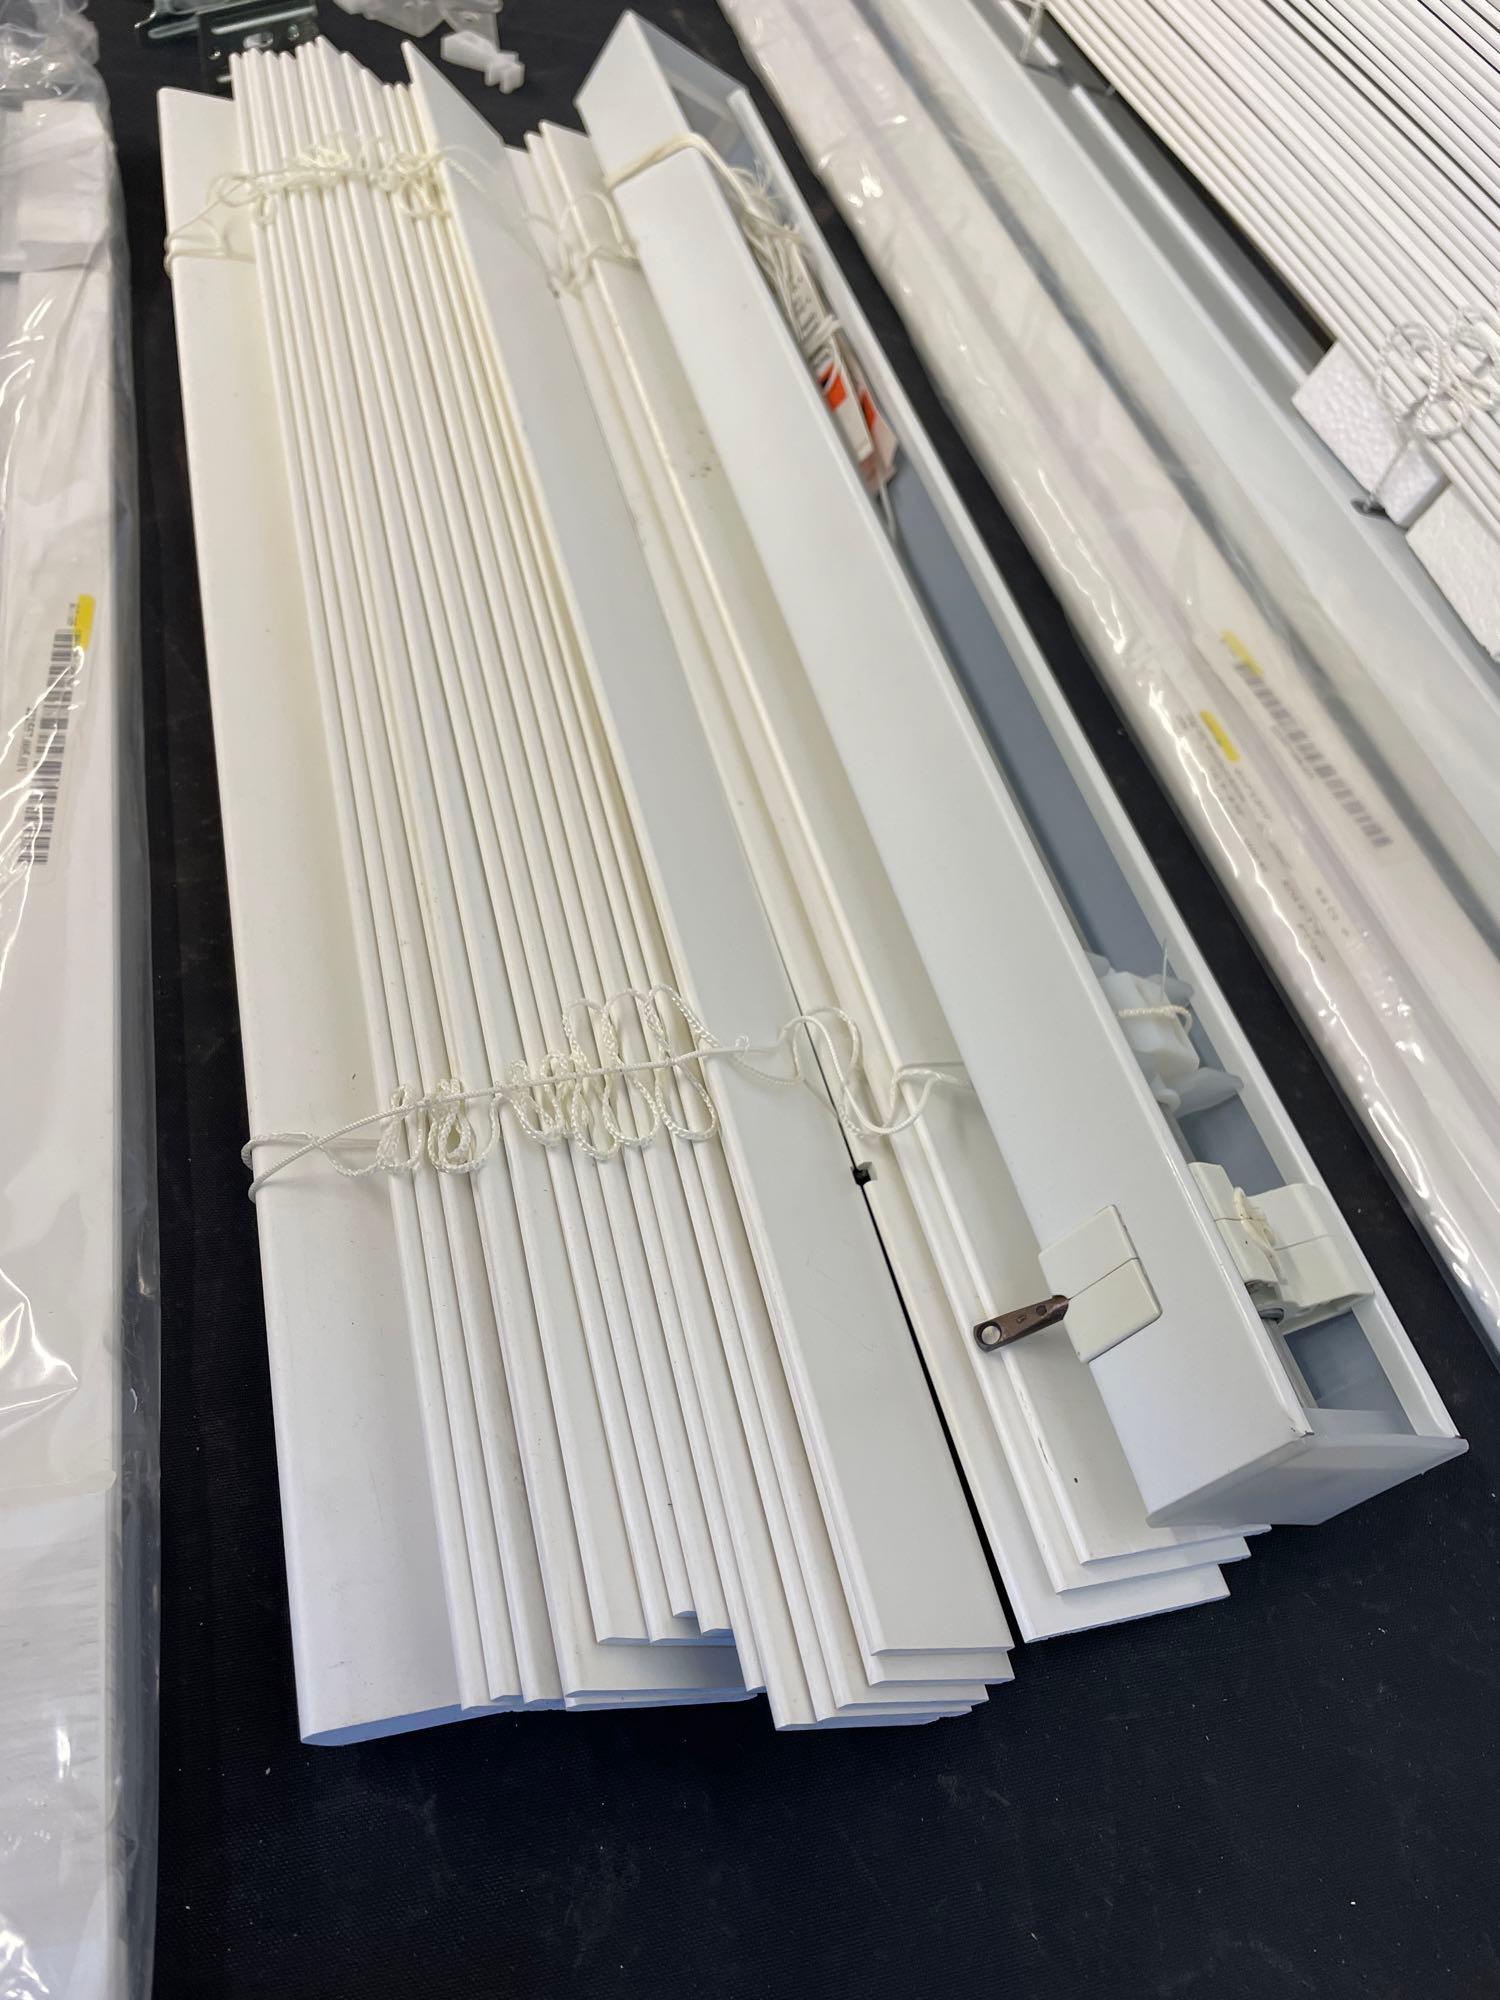 blinds 22x33 3/4? and 45 1/4x45 1/4? new